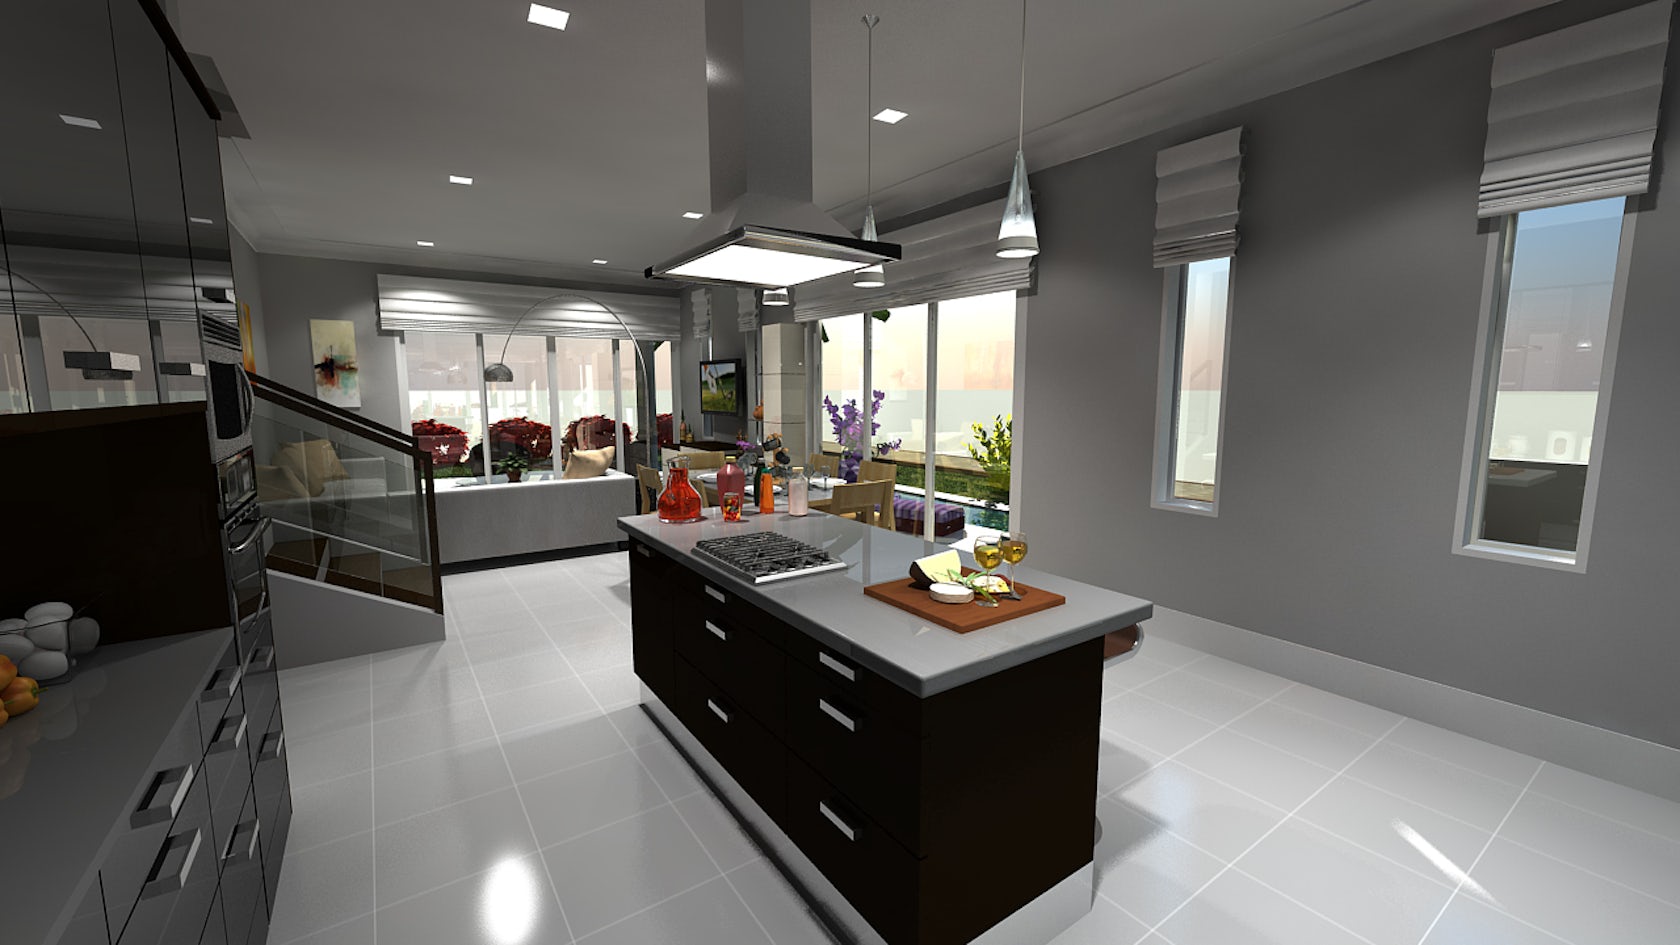 3D Kitchen Architecture Modeling & Rendering Project